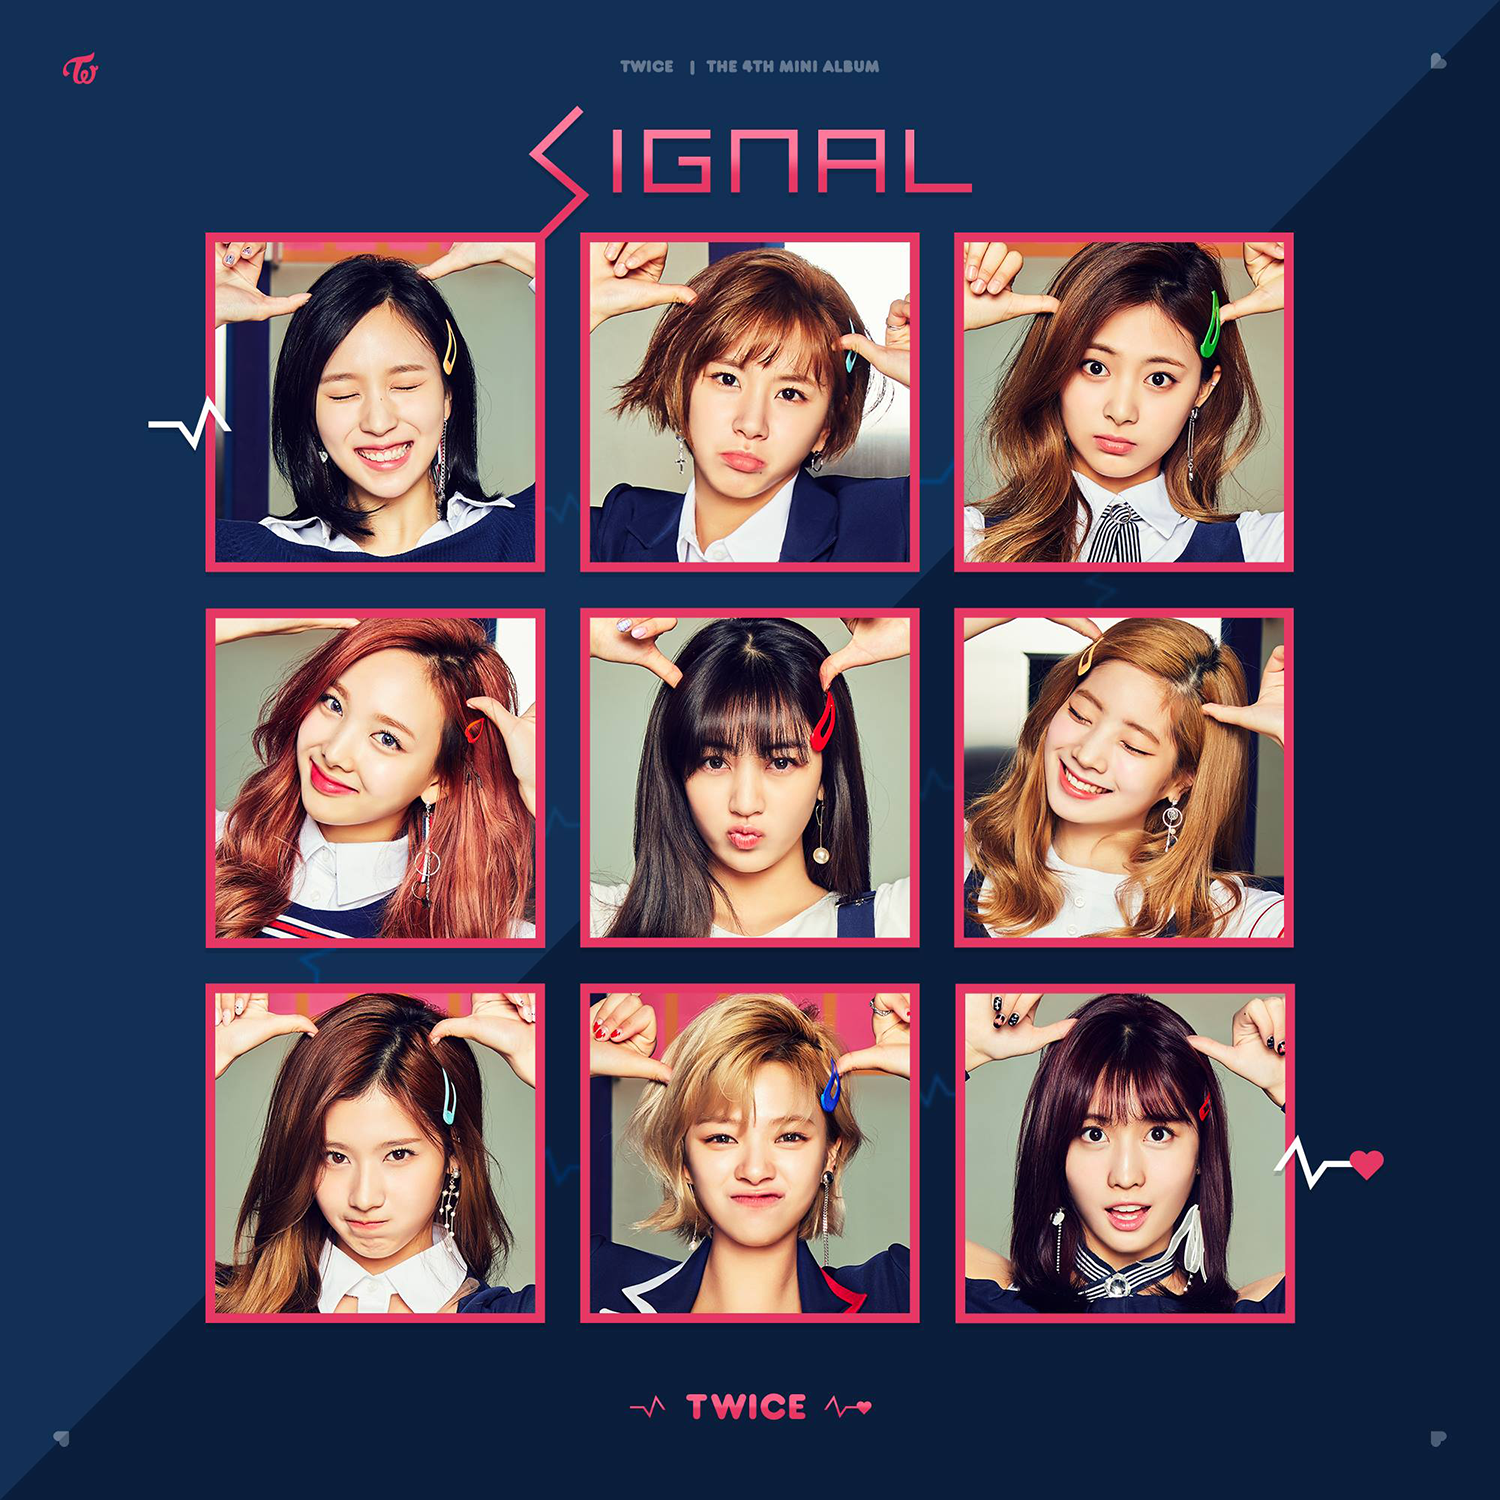 Signal Twice Kpop Wiki Fandom Read signal from the story twice concept photos by snowflakesshower (park joyee) with 508 reads. signal twice kpop wiki fandom